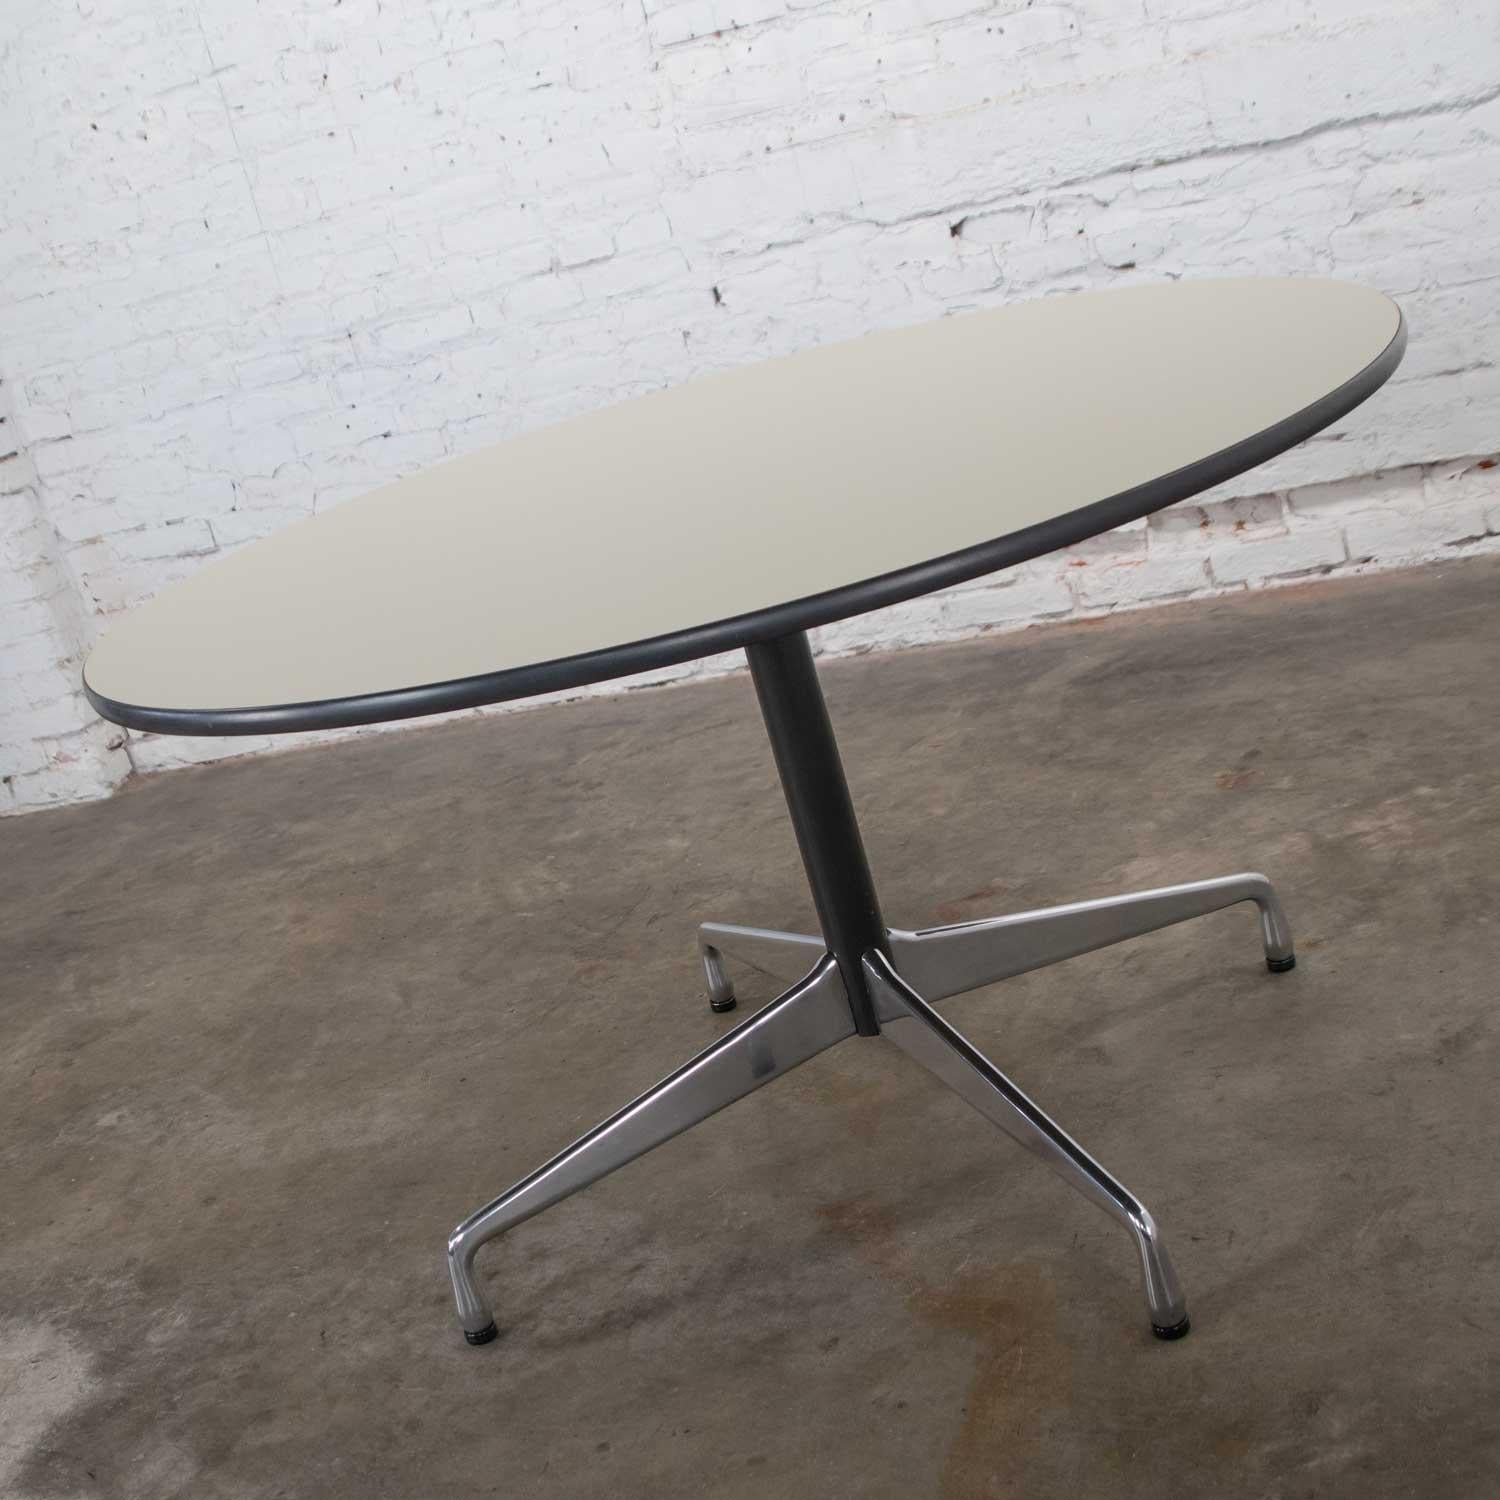 American Eames Herman Miller Universal Base Round Table Off-White Laminate Top For Sale